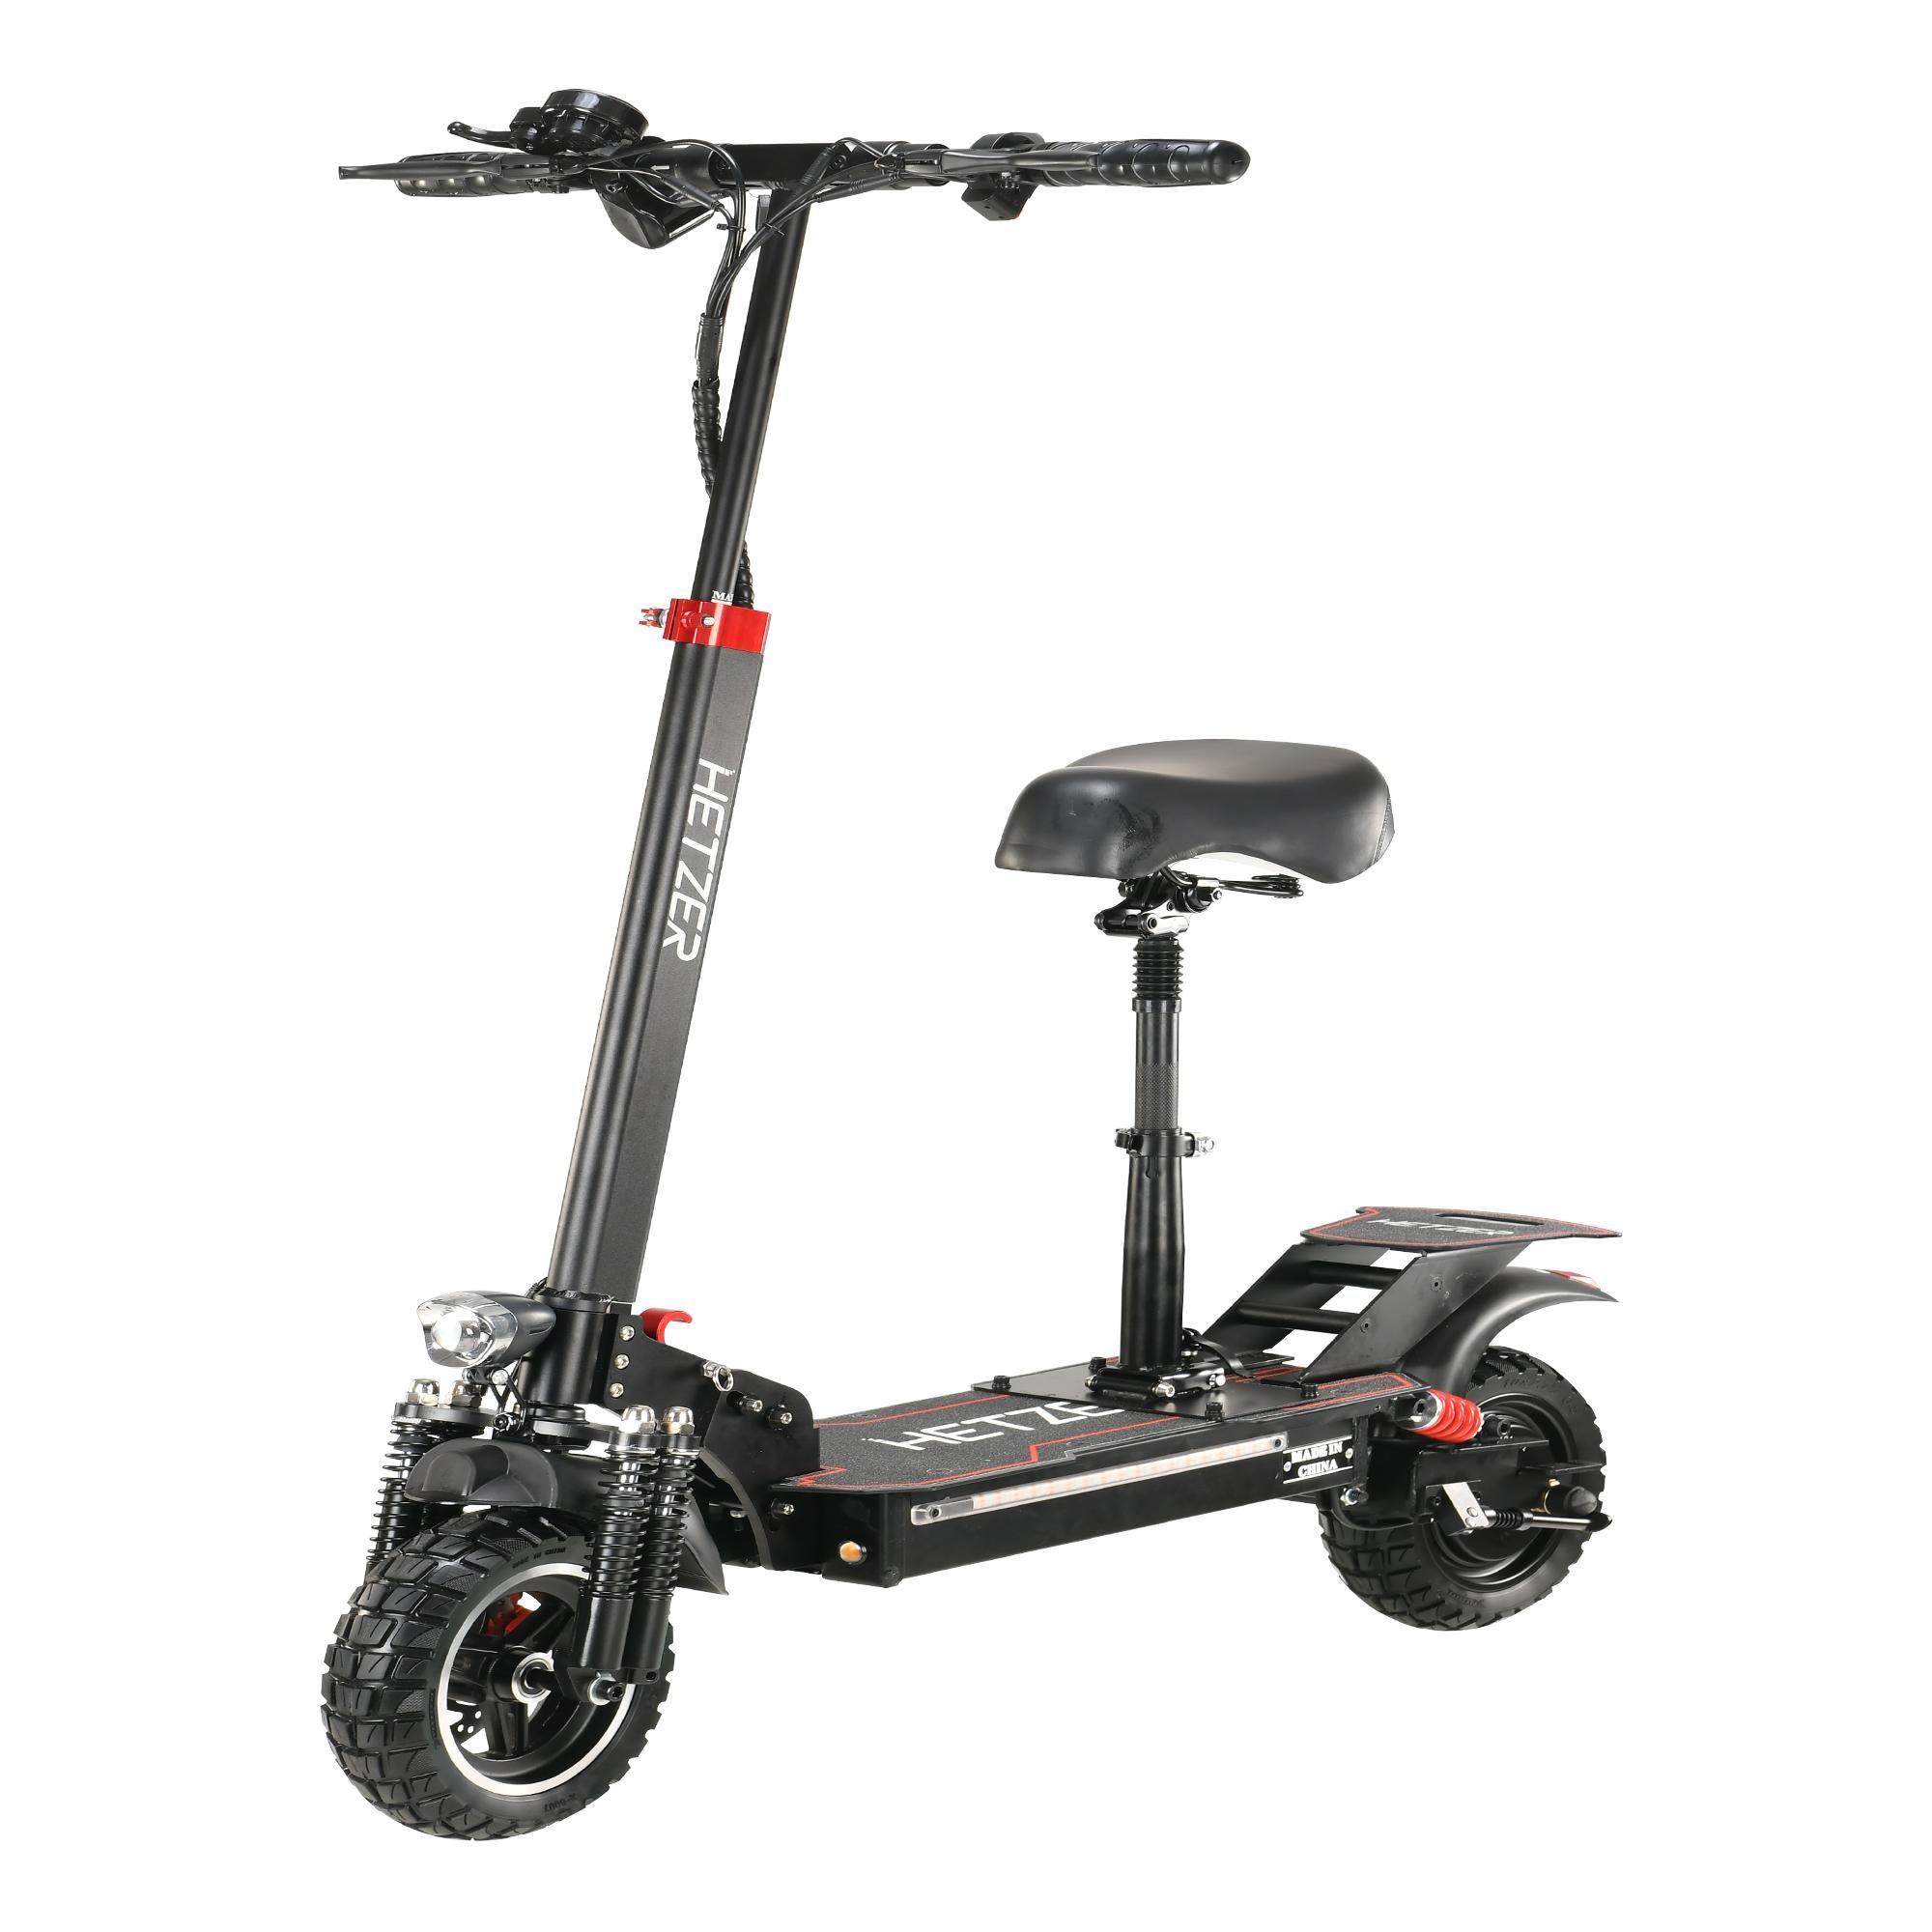 H5 GT Electric Scooter Black